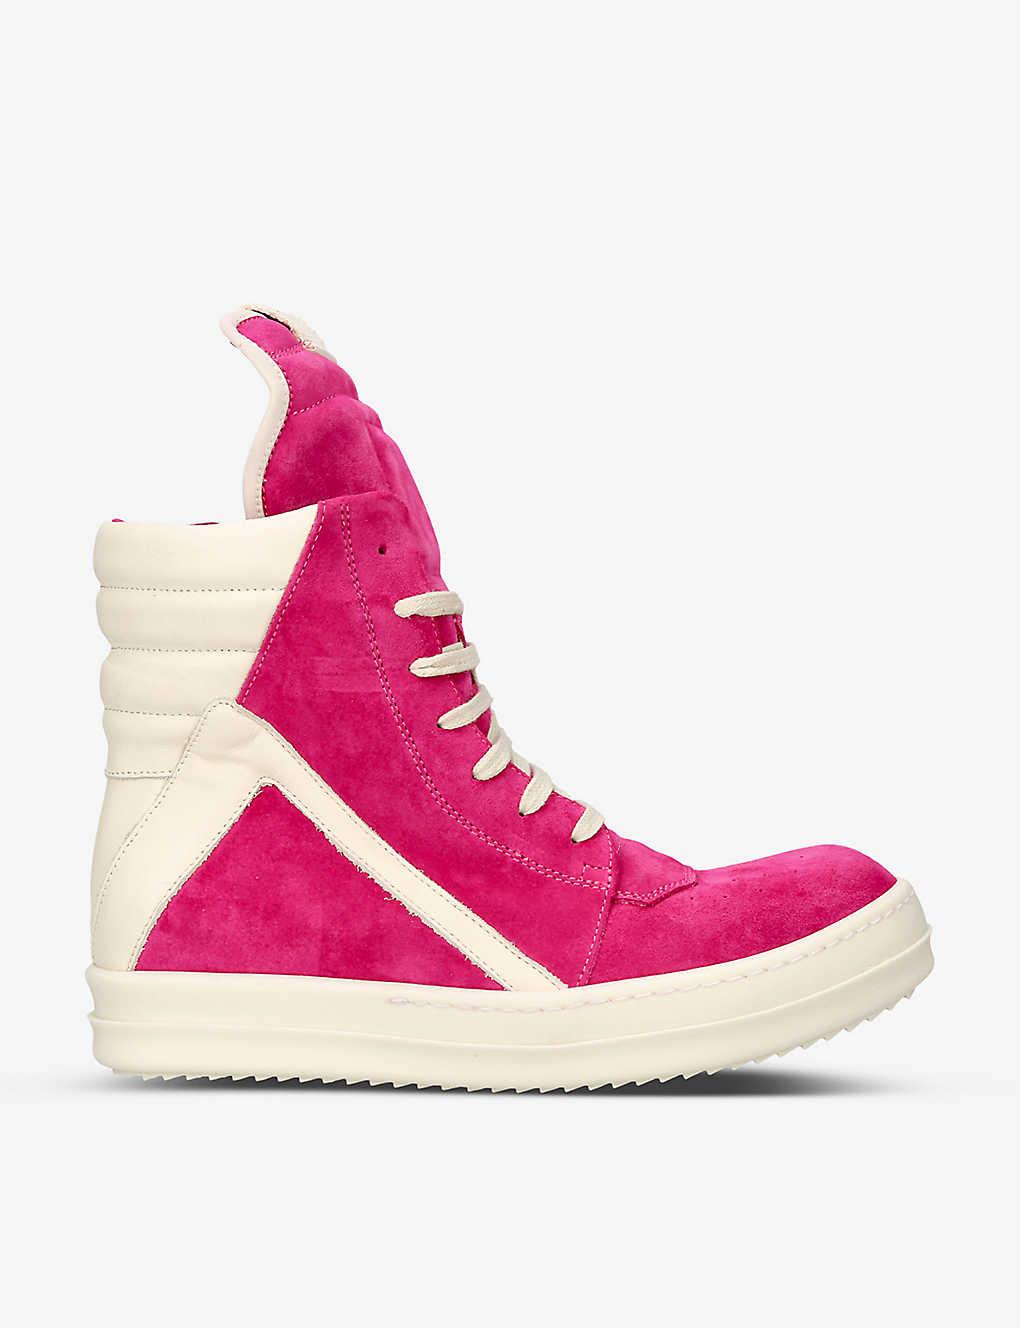 Rick Owens Geobasked Panelled Suede High-top Trainers in Pink | Lyst